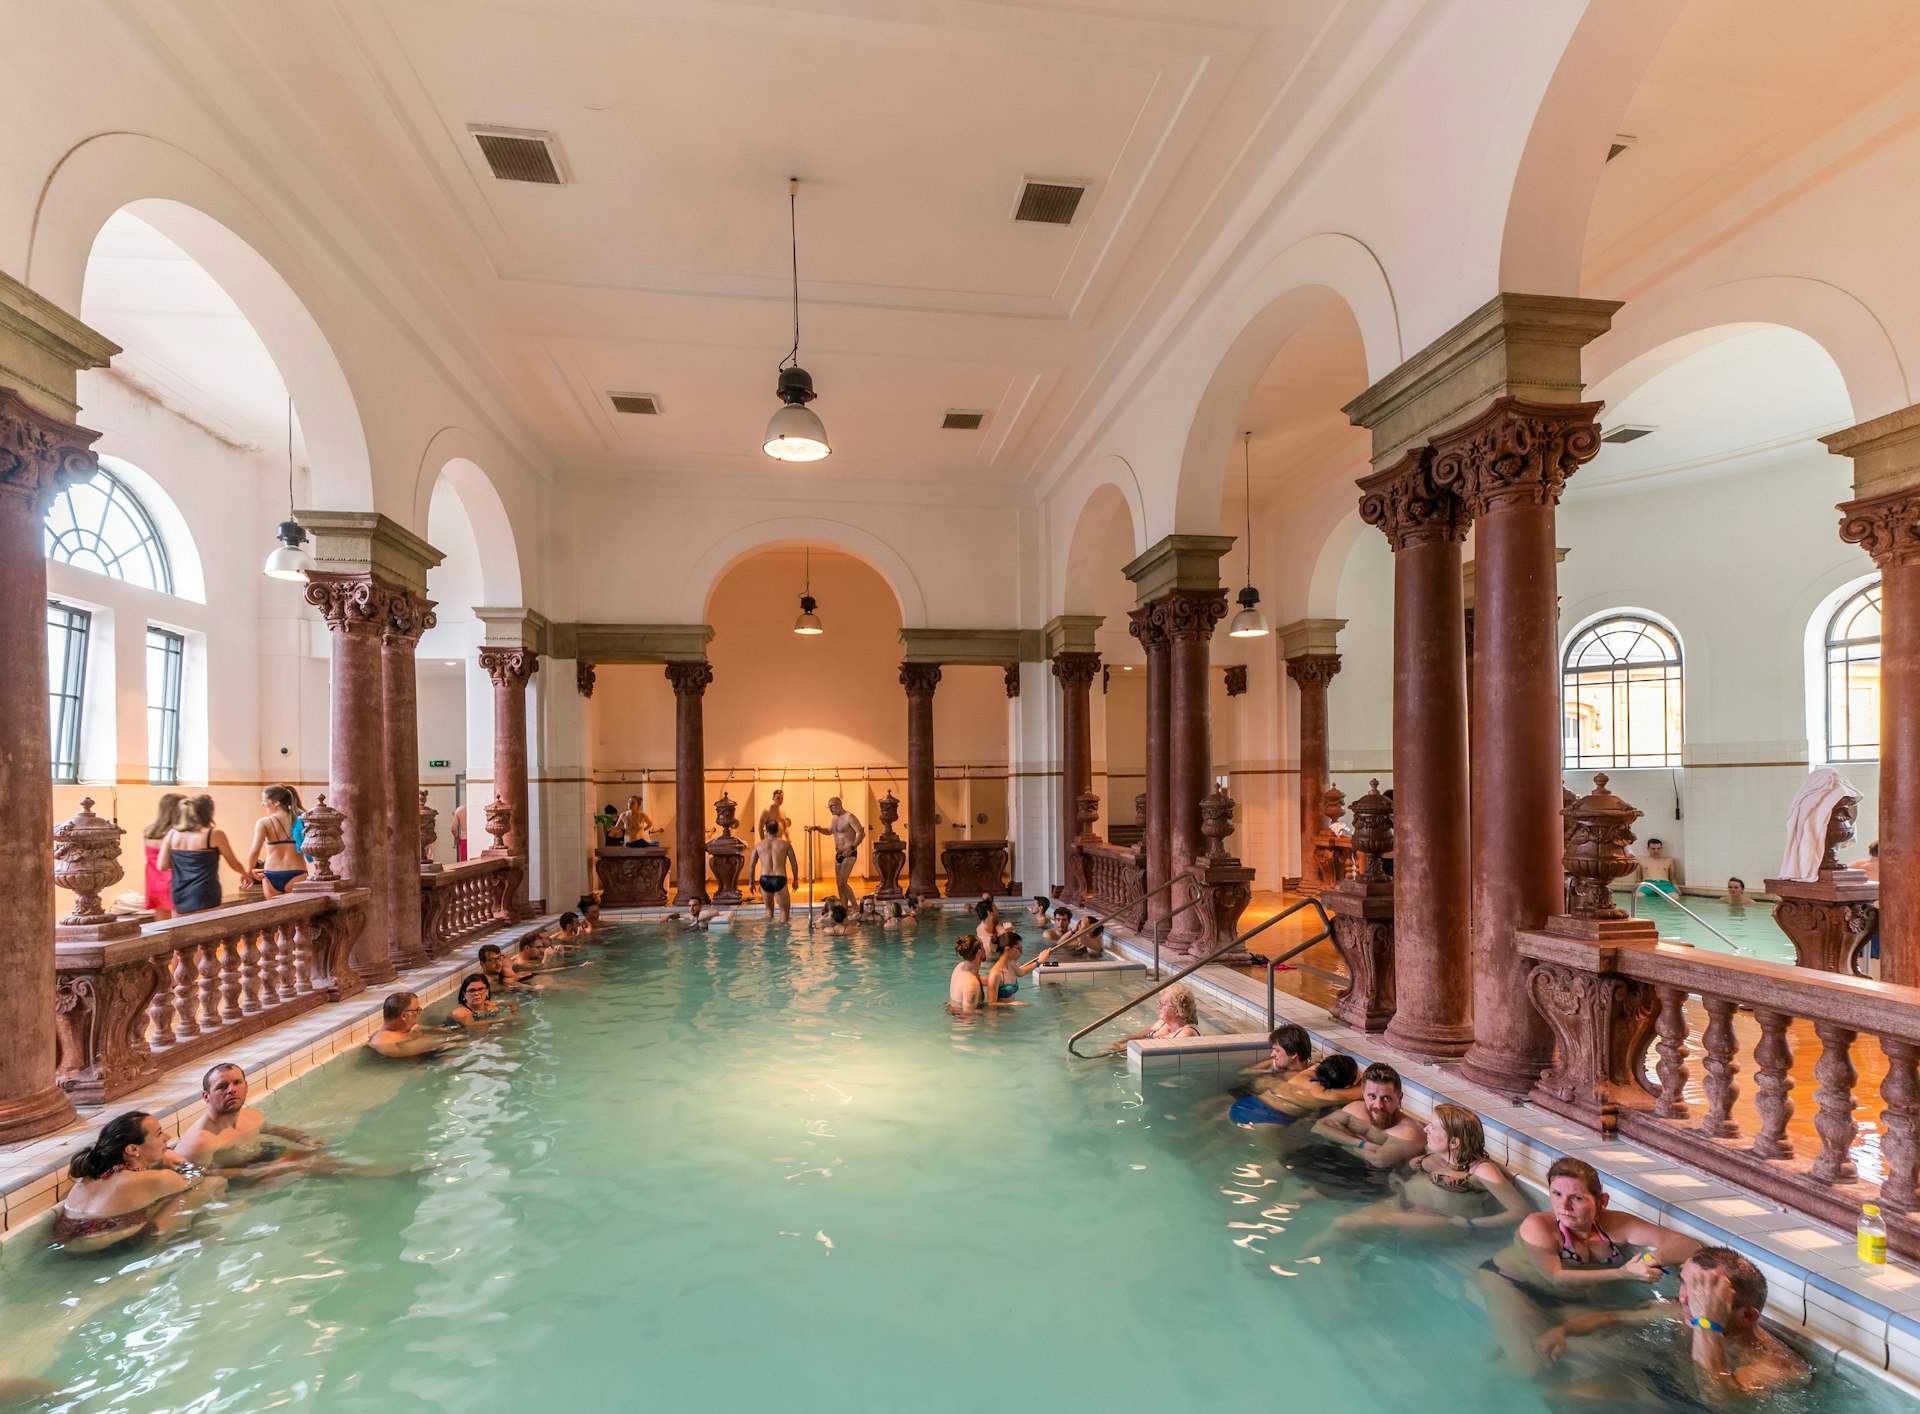 People soak in a large indoor thermal bath